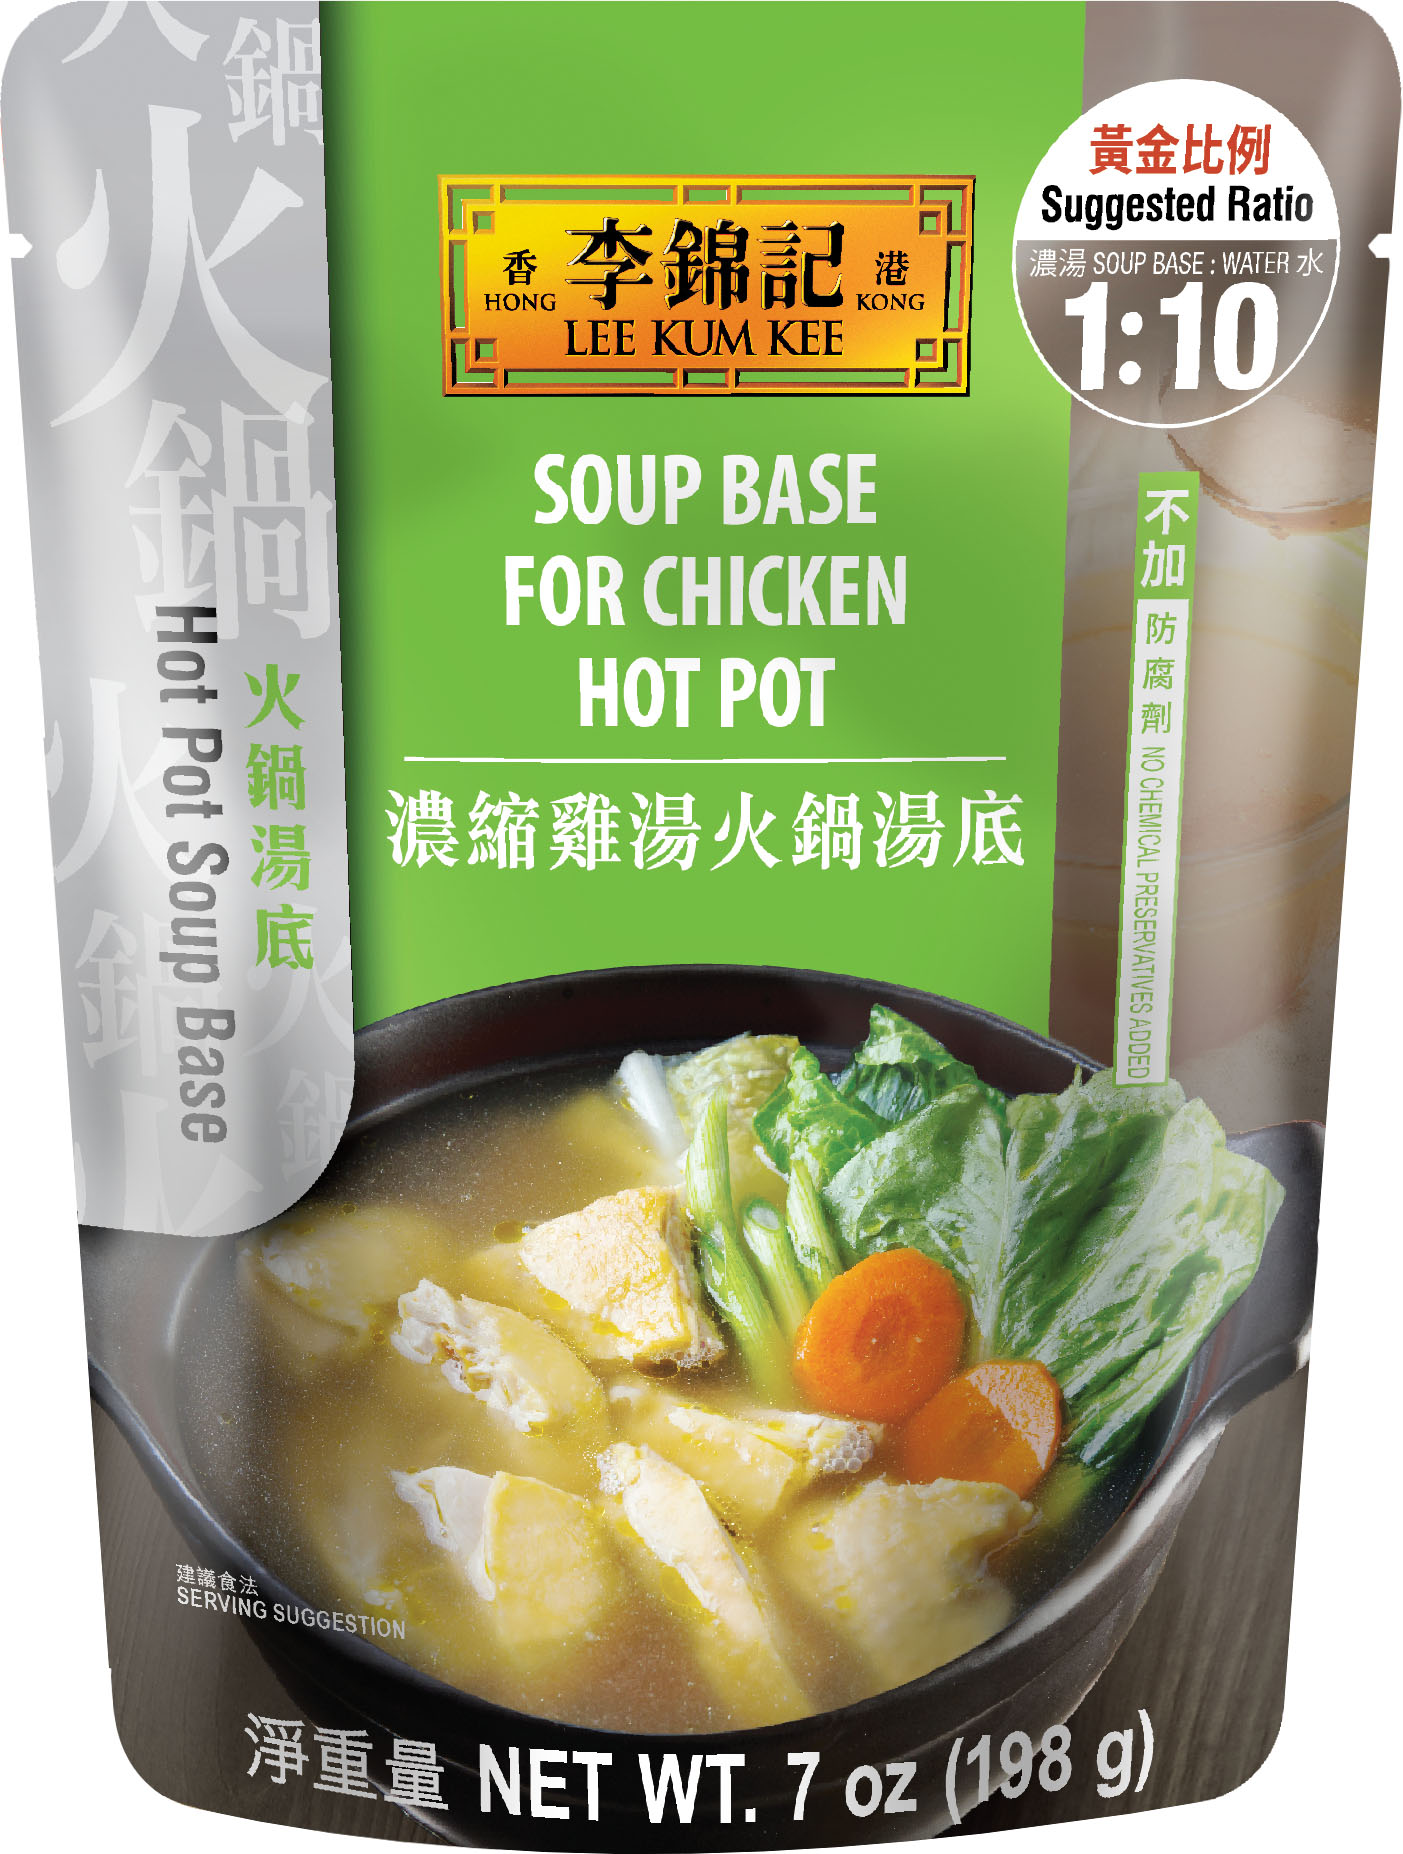 CHICKEN SOUP BASE - Chicken & Noodles anyone? No chemicals or